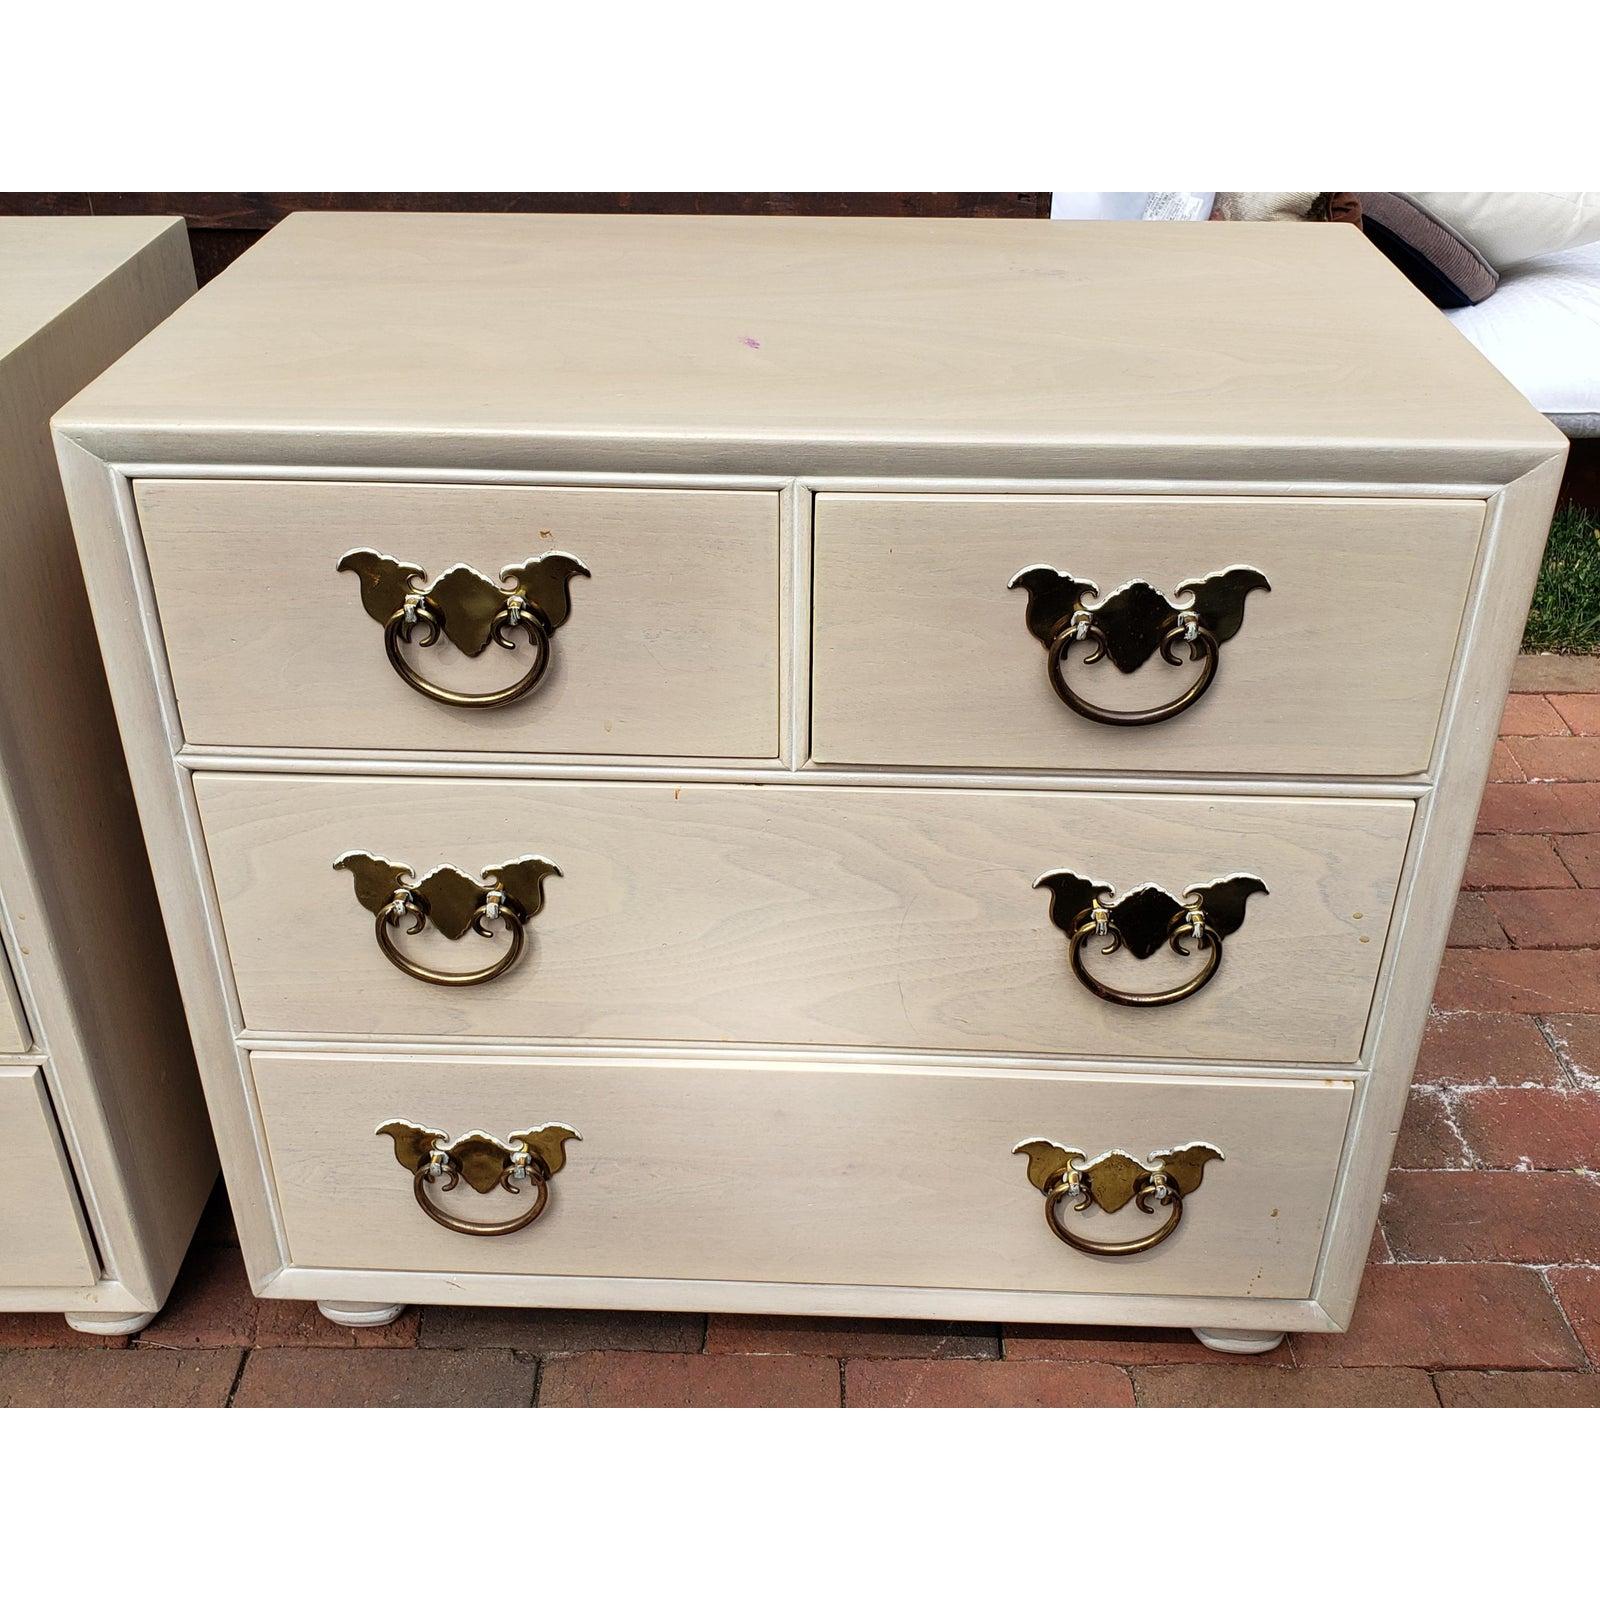 North American 1970s Henredon American Asian Inspired Bachelor Chests / Nightstands, a Pair